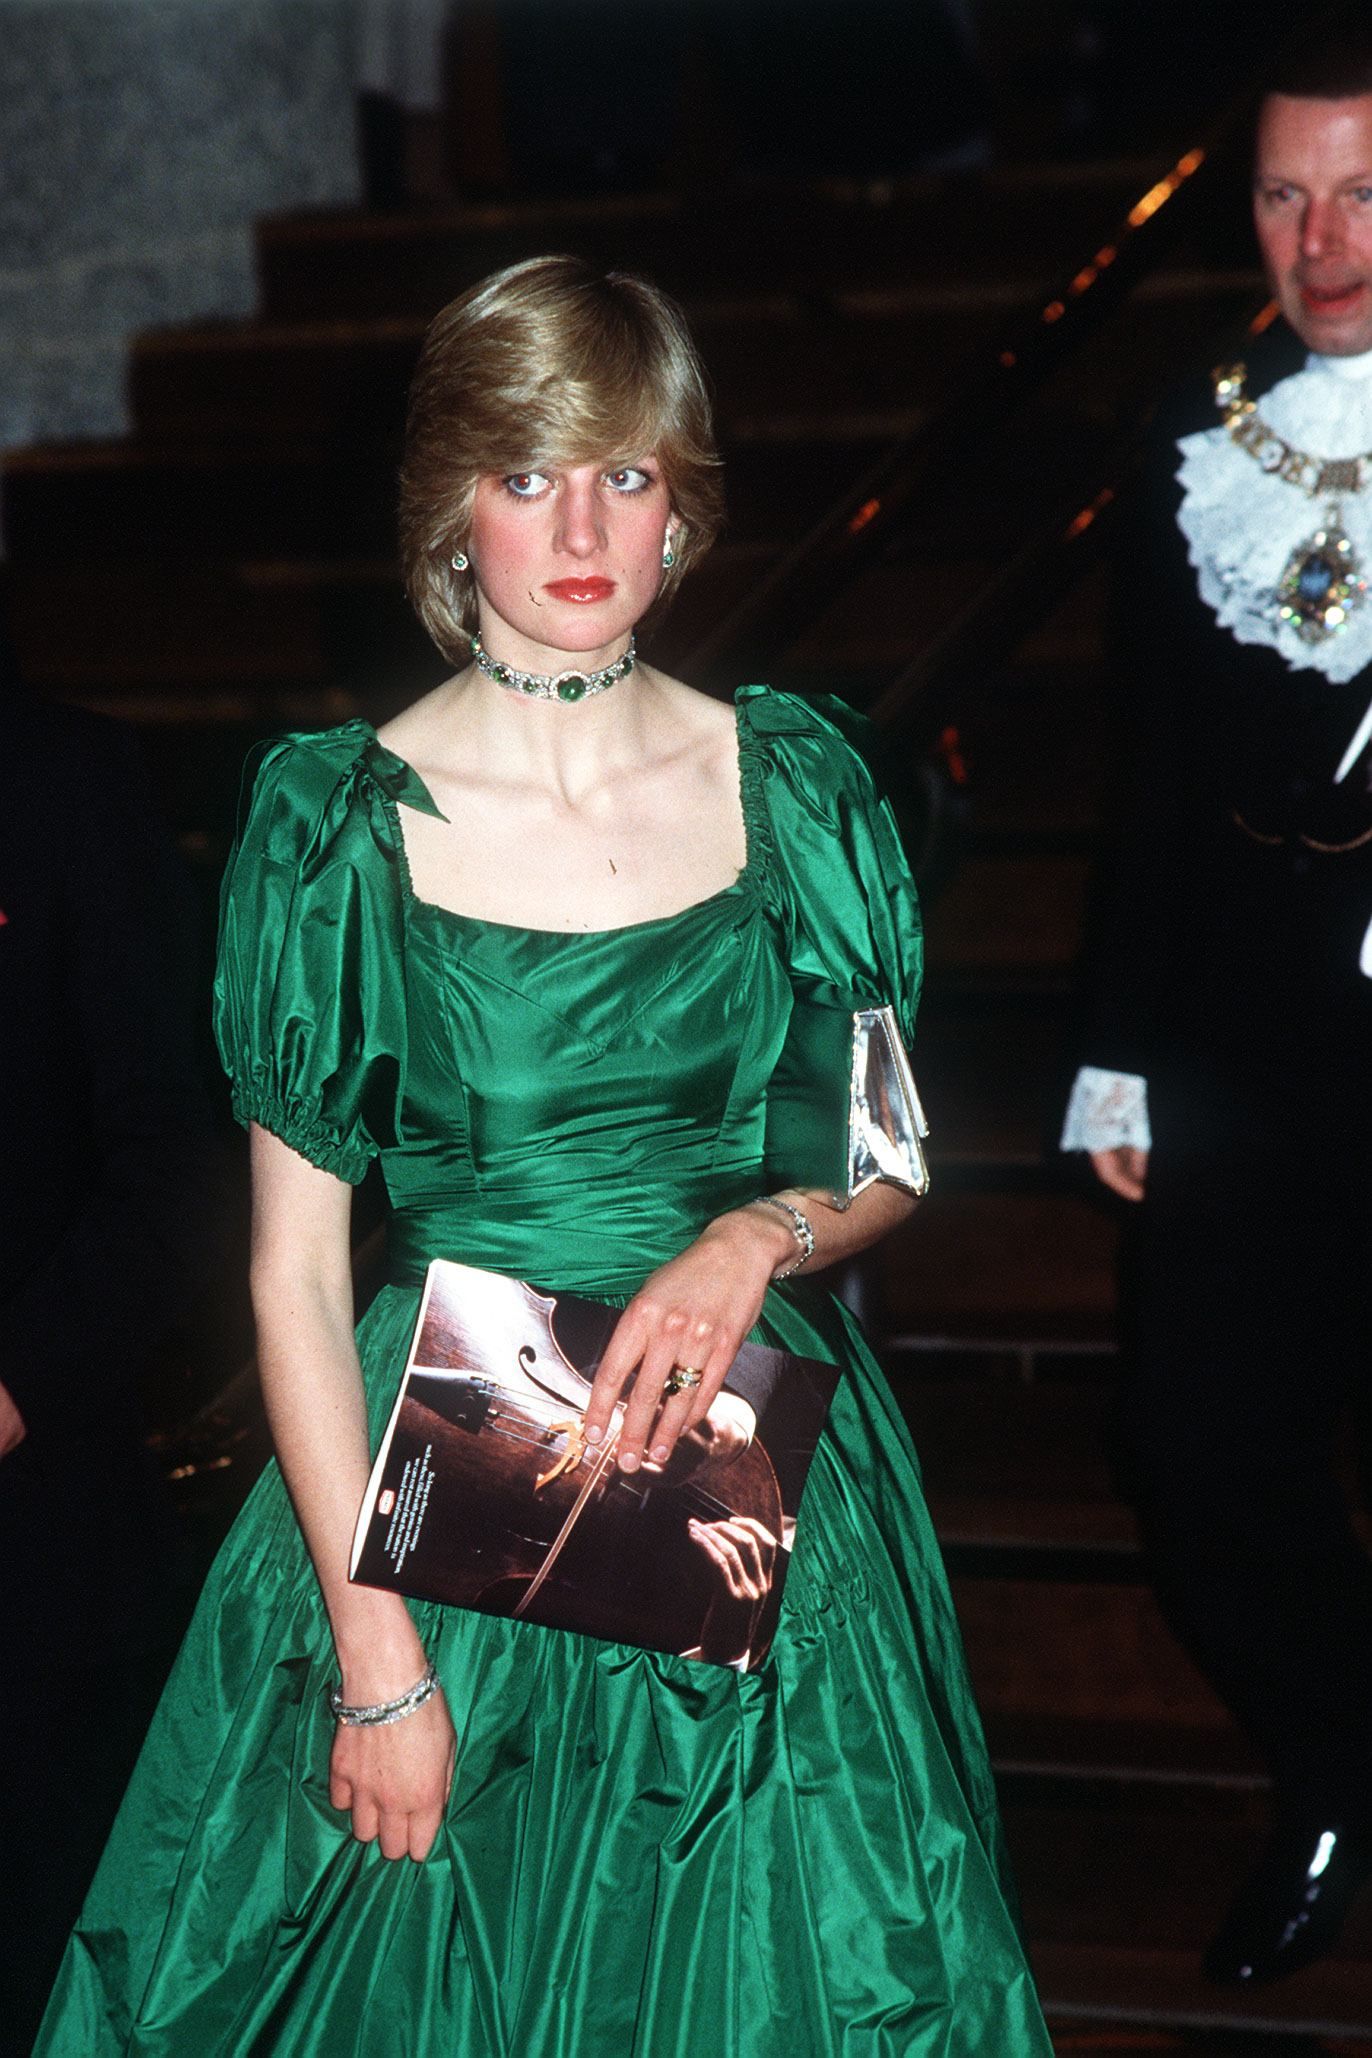 What happened next to Princess Diana's most famous outfits